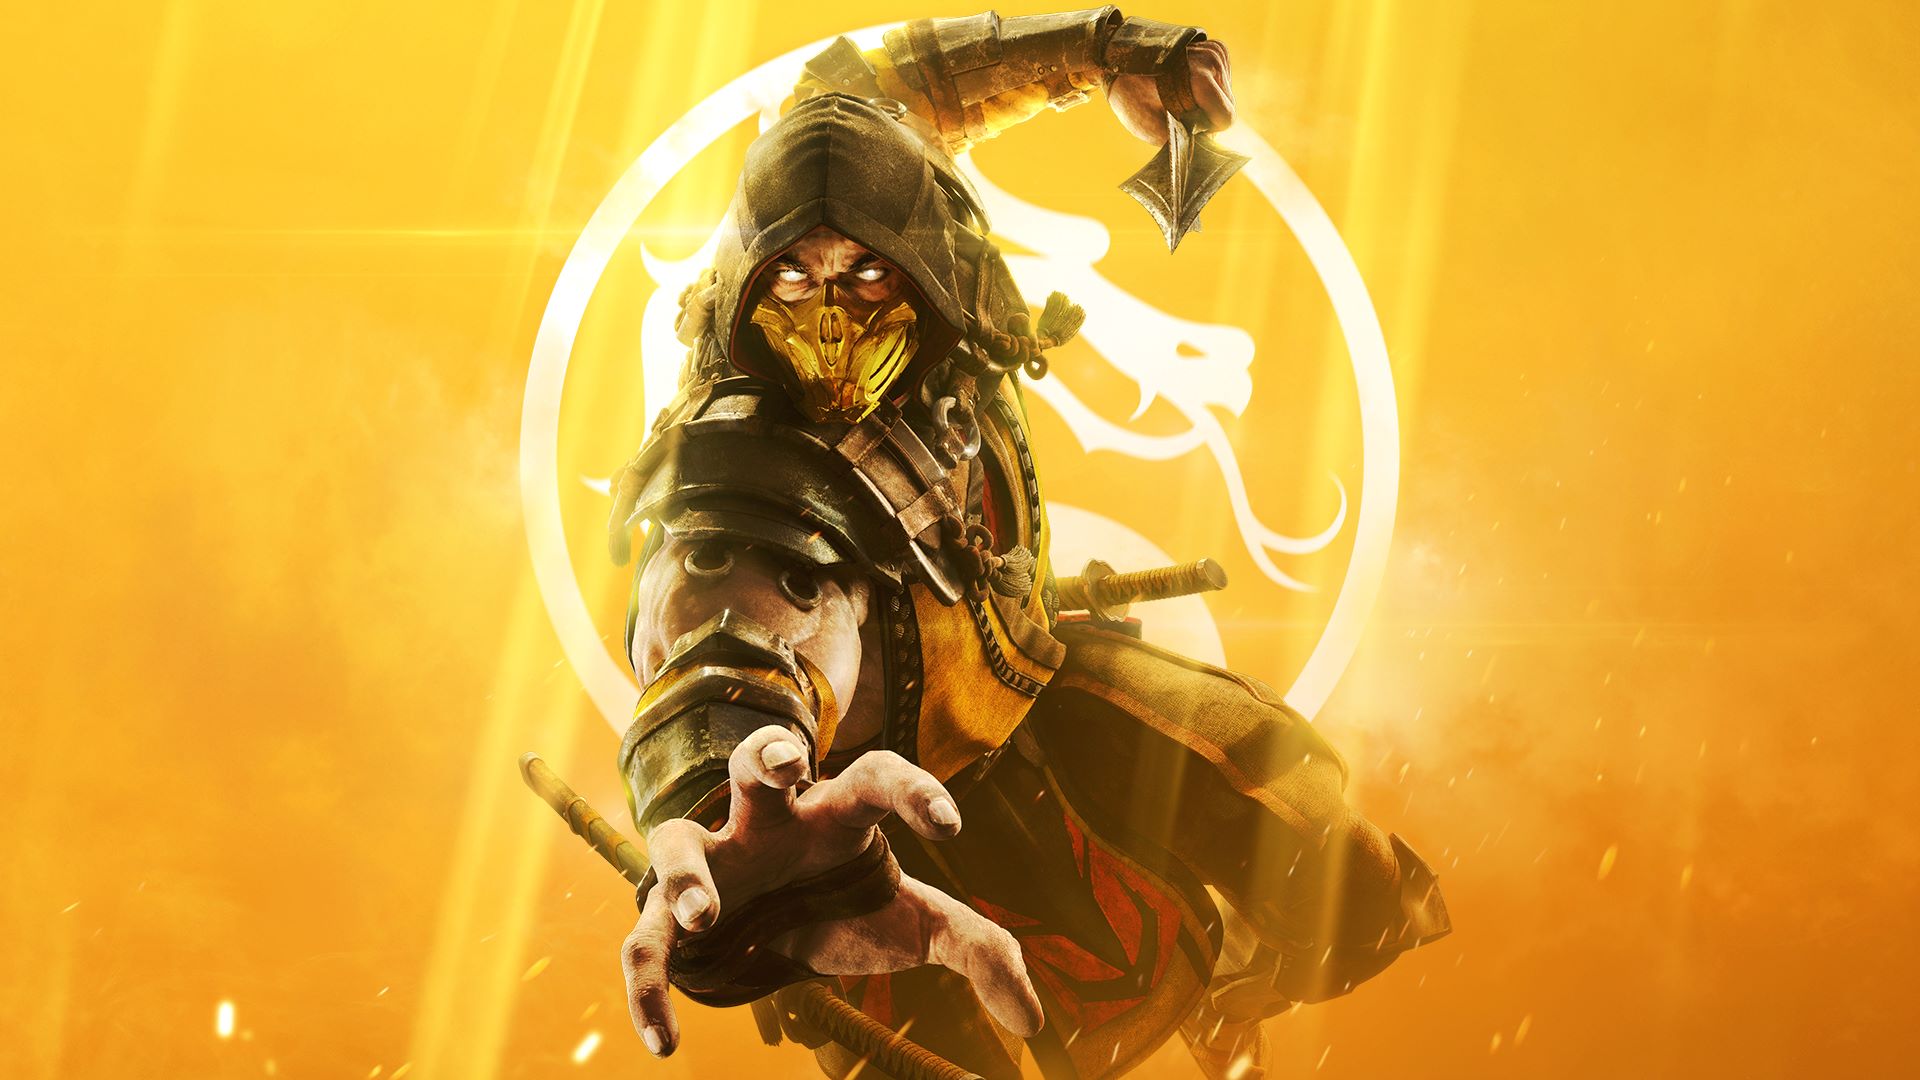 The Ridiculous Cost Of The Sum Of Mortal Kombat 11’s Character Skins